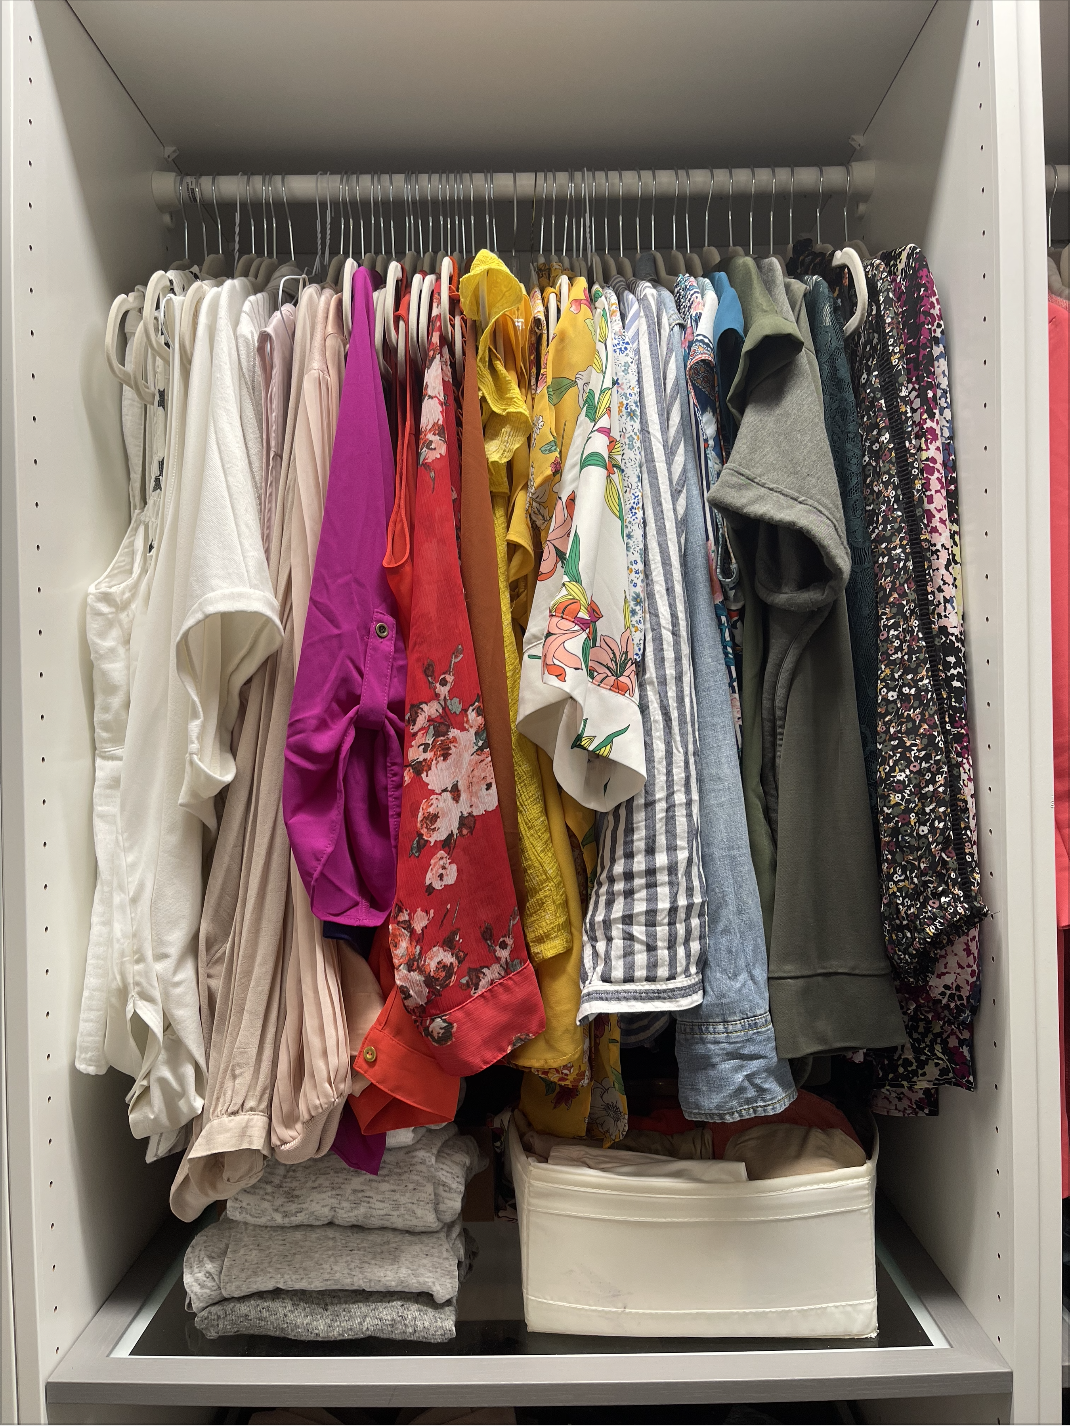 IN THING Shares their NEW stellar closet organizing Wardrobe Makeovers service.